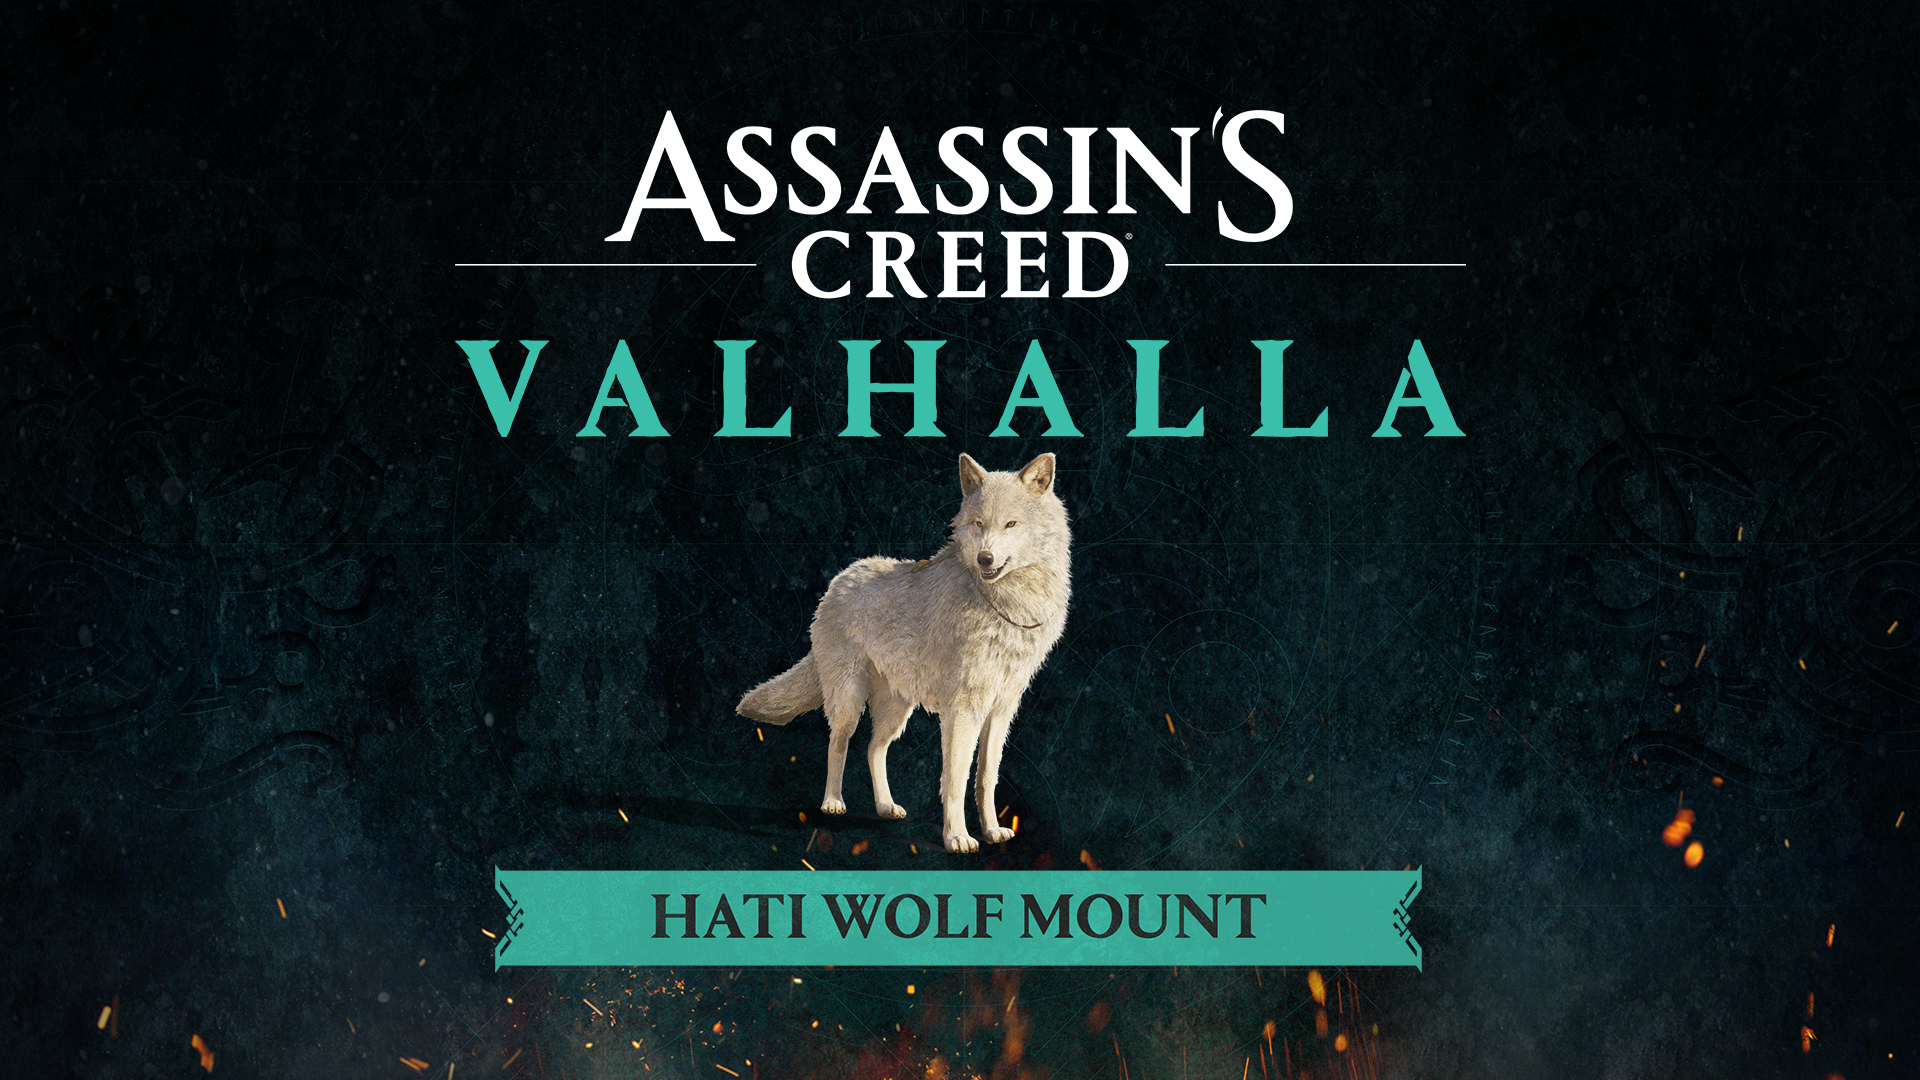 How to Access The Last Chapter  Assassin's Creed Valhalla 